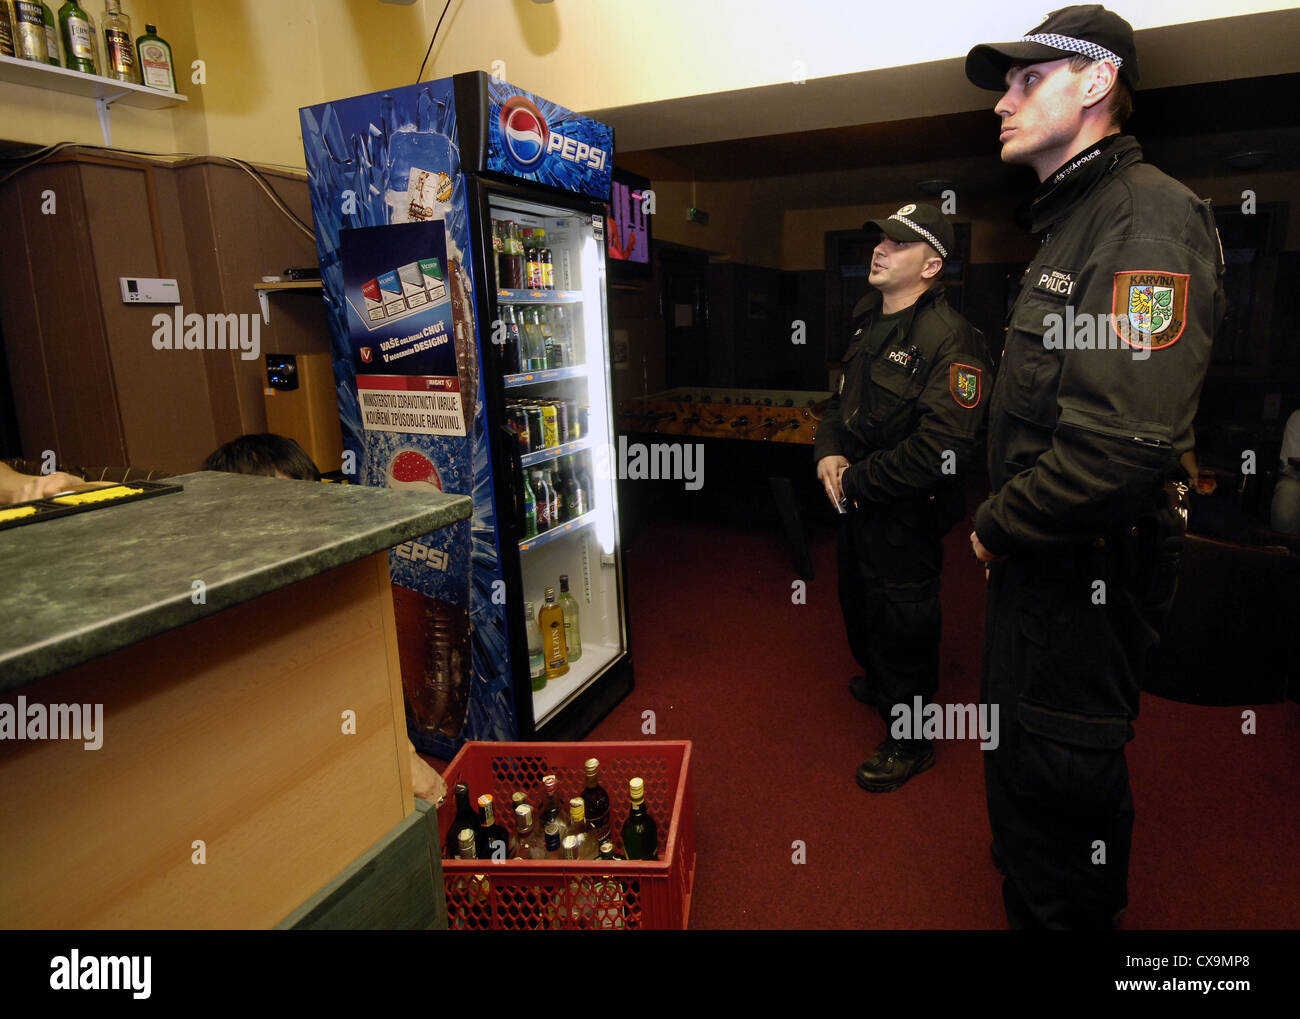 policemen, restaurant, pub, prohibition,  methyl alcohol, Complete ban of hard alcohol in the Czech Republic Stock Photo